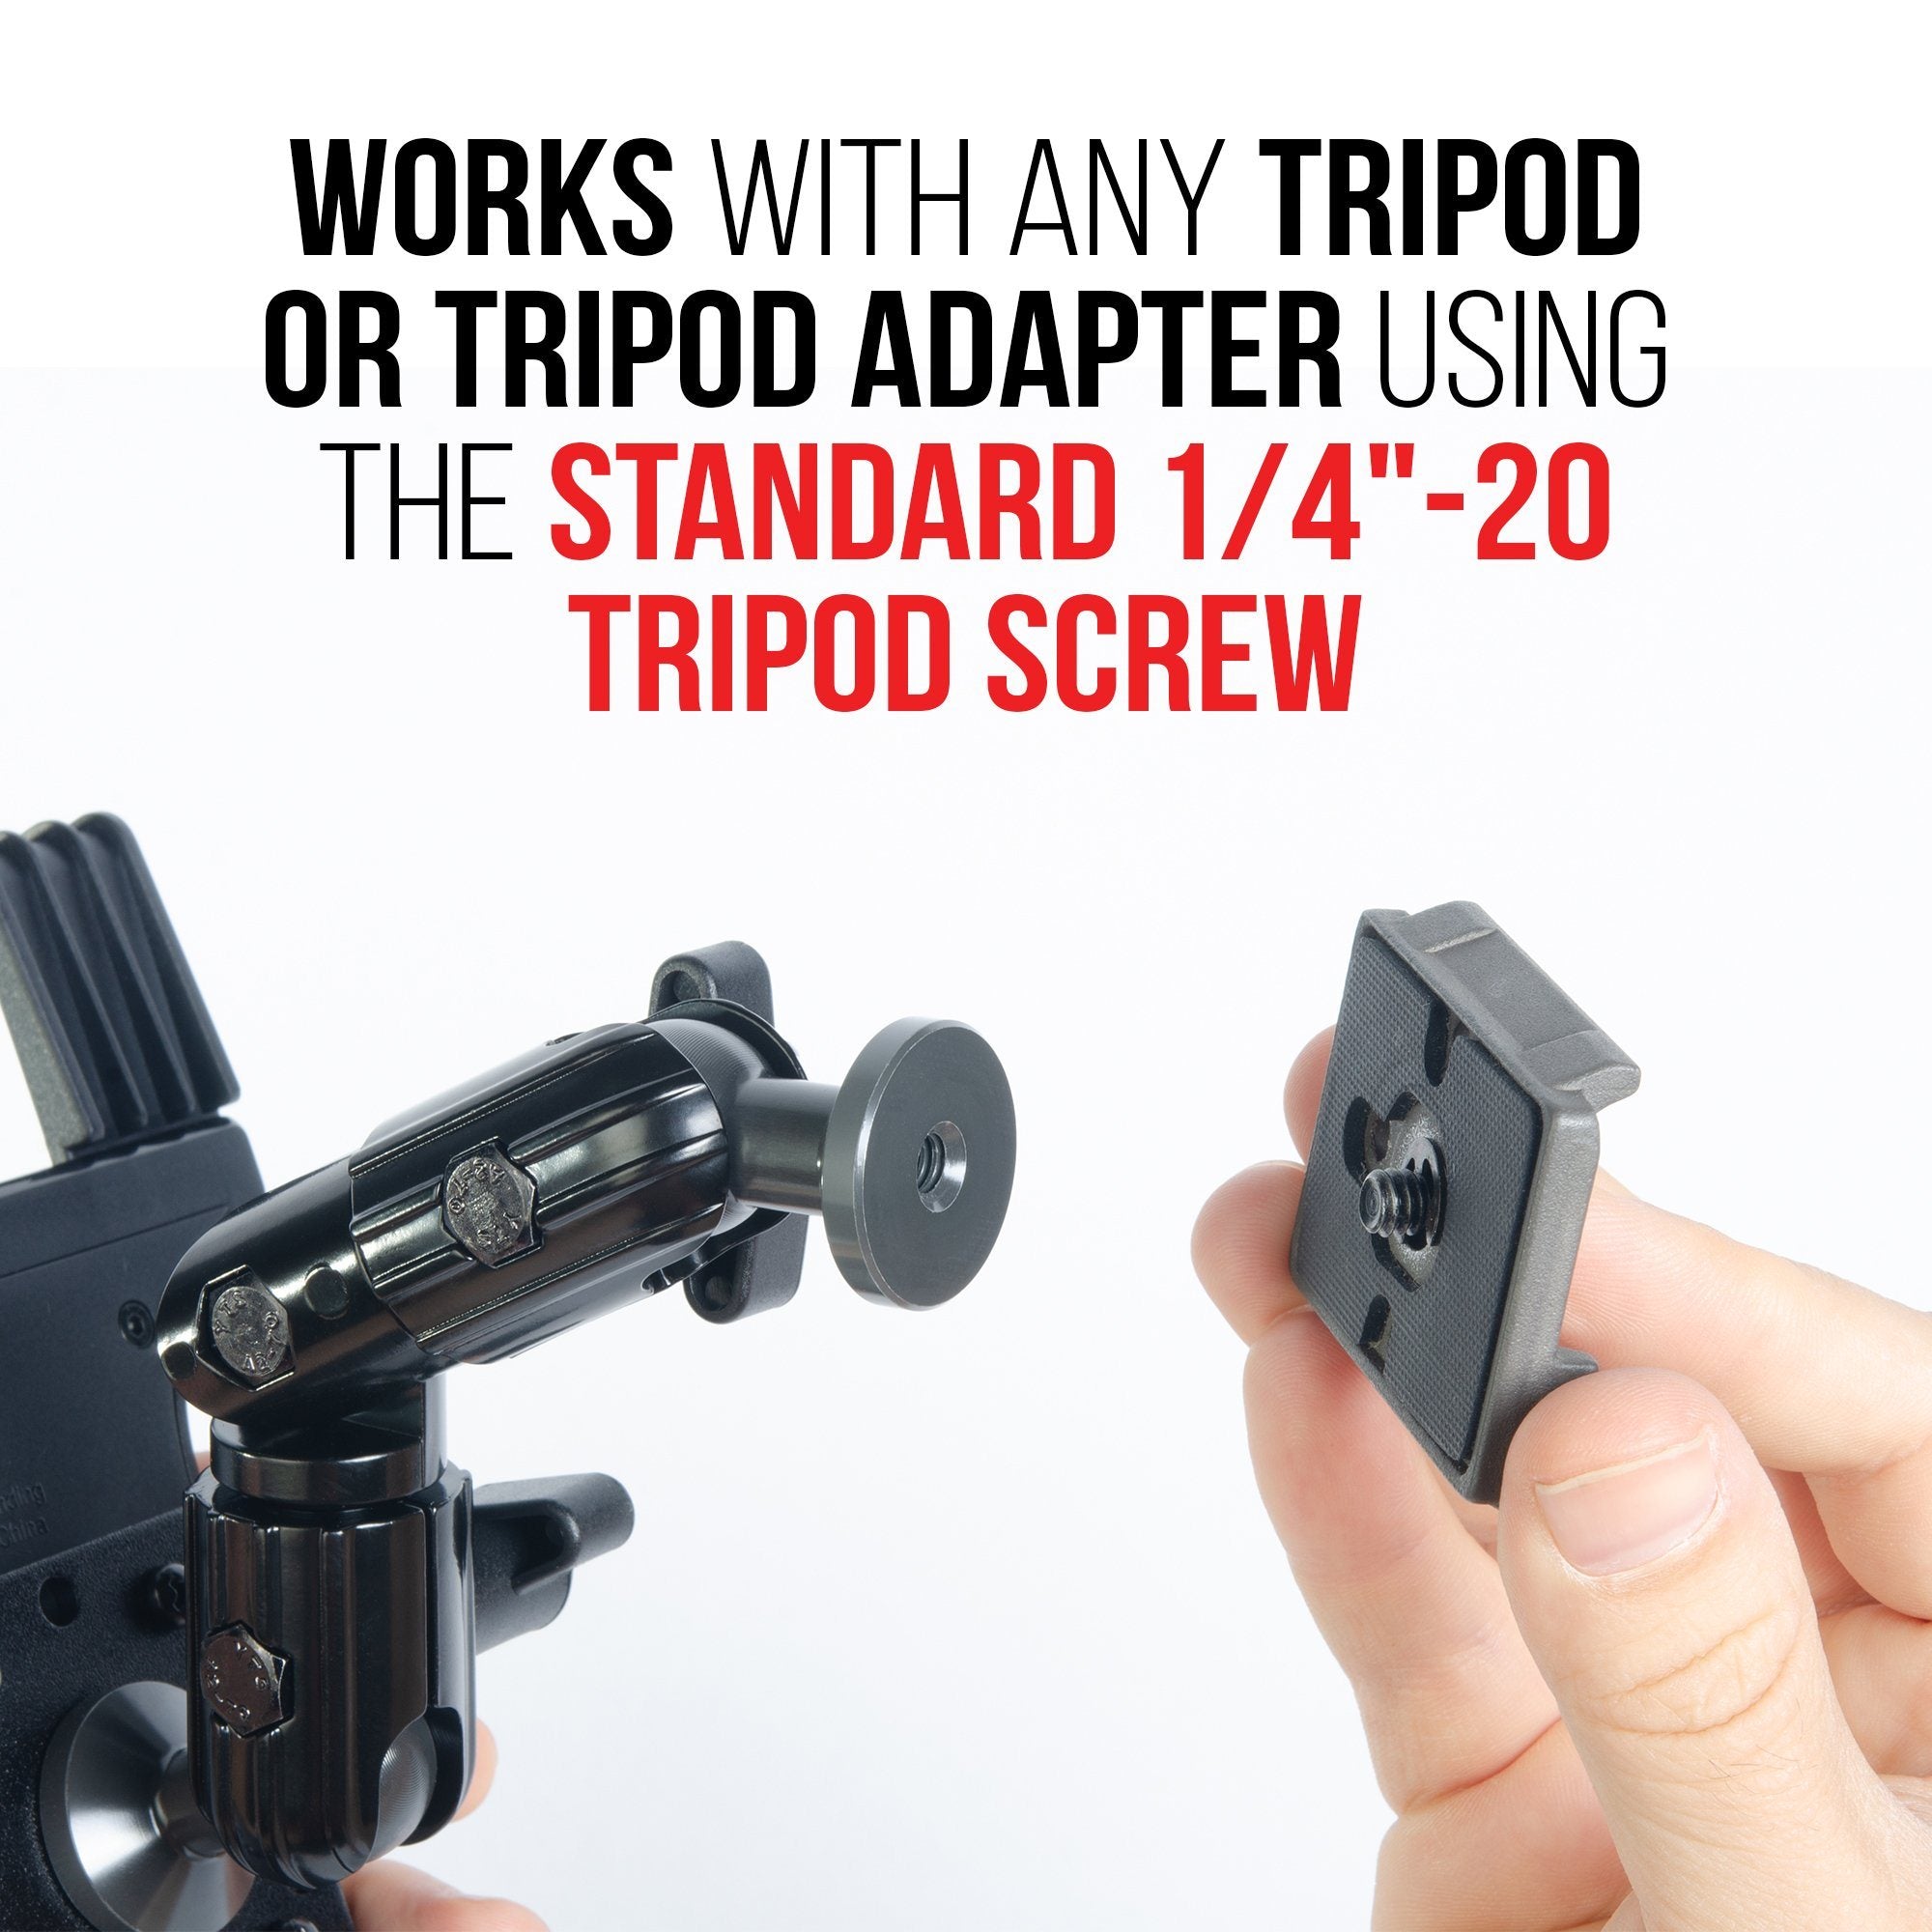 Tablet Mount for Tripod |Enduro Series| Spring Cradle | 1/4"-20 Screw Mountable | Compatible with iPad, Galaxy and more. Commercial Grade Parts